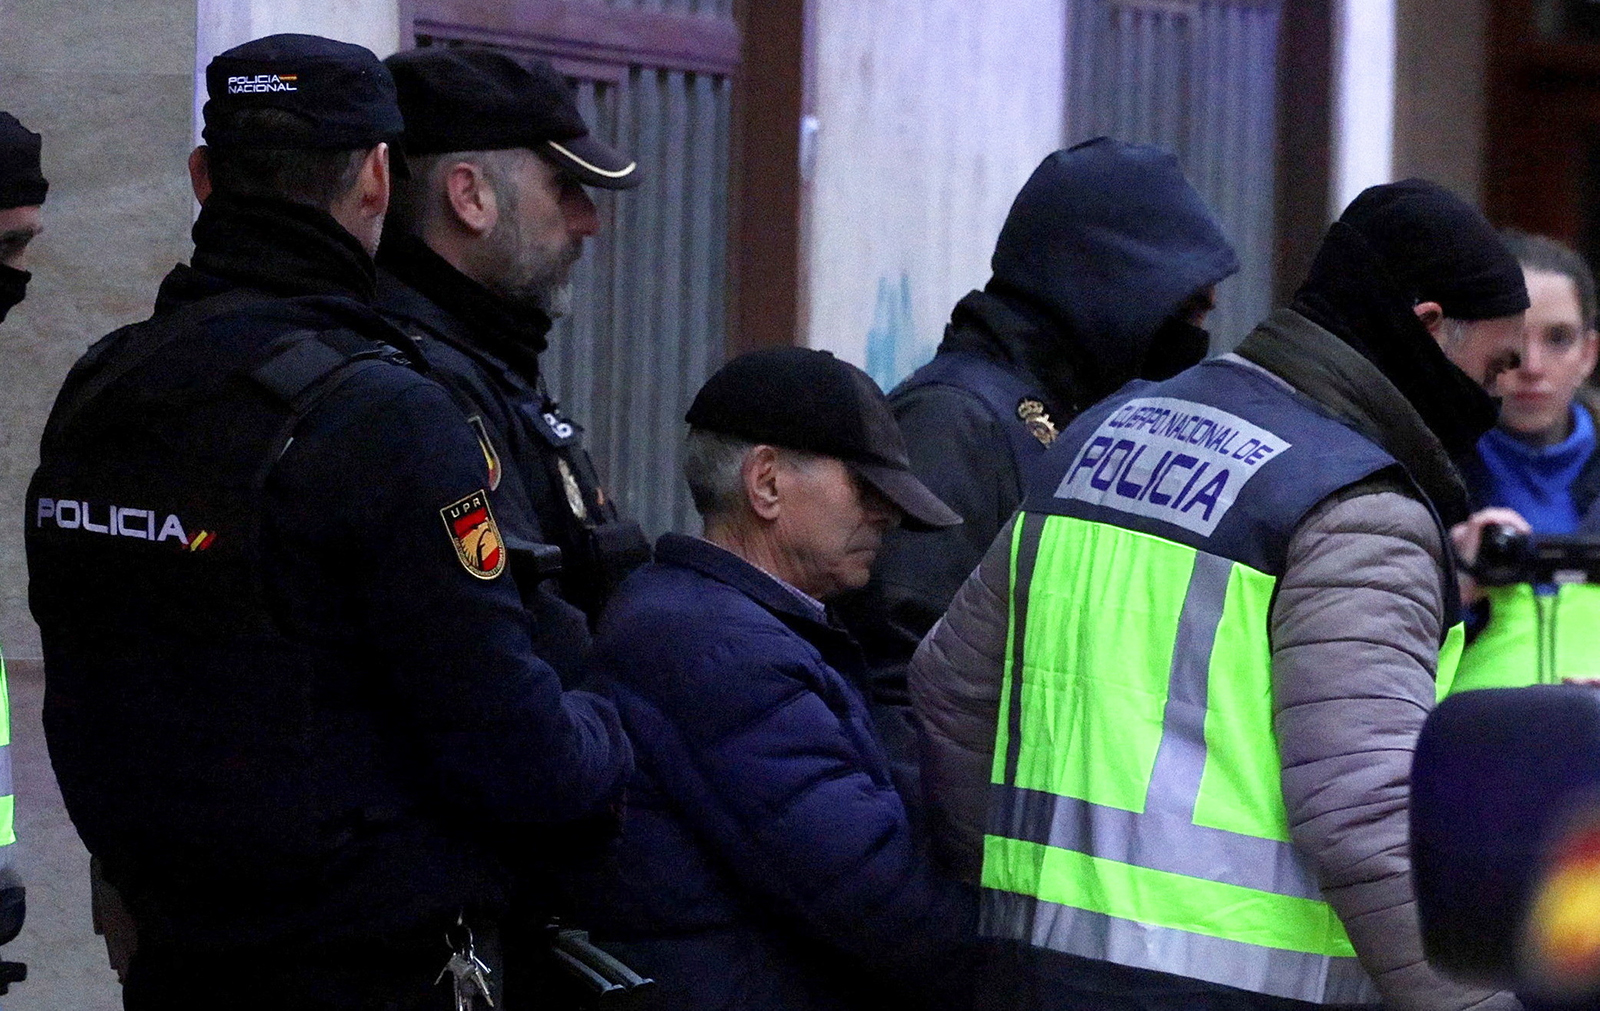 Spanish national police officers lead away a 74-year-old man under arrest on suspicion of being the sender of letter-bombs in November and December to the Ukrainian and U.S. embassies and several institutions in Spain, in Miranda de Ebro, Spain January 25, 2023. REUTERS/Vincent West